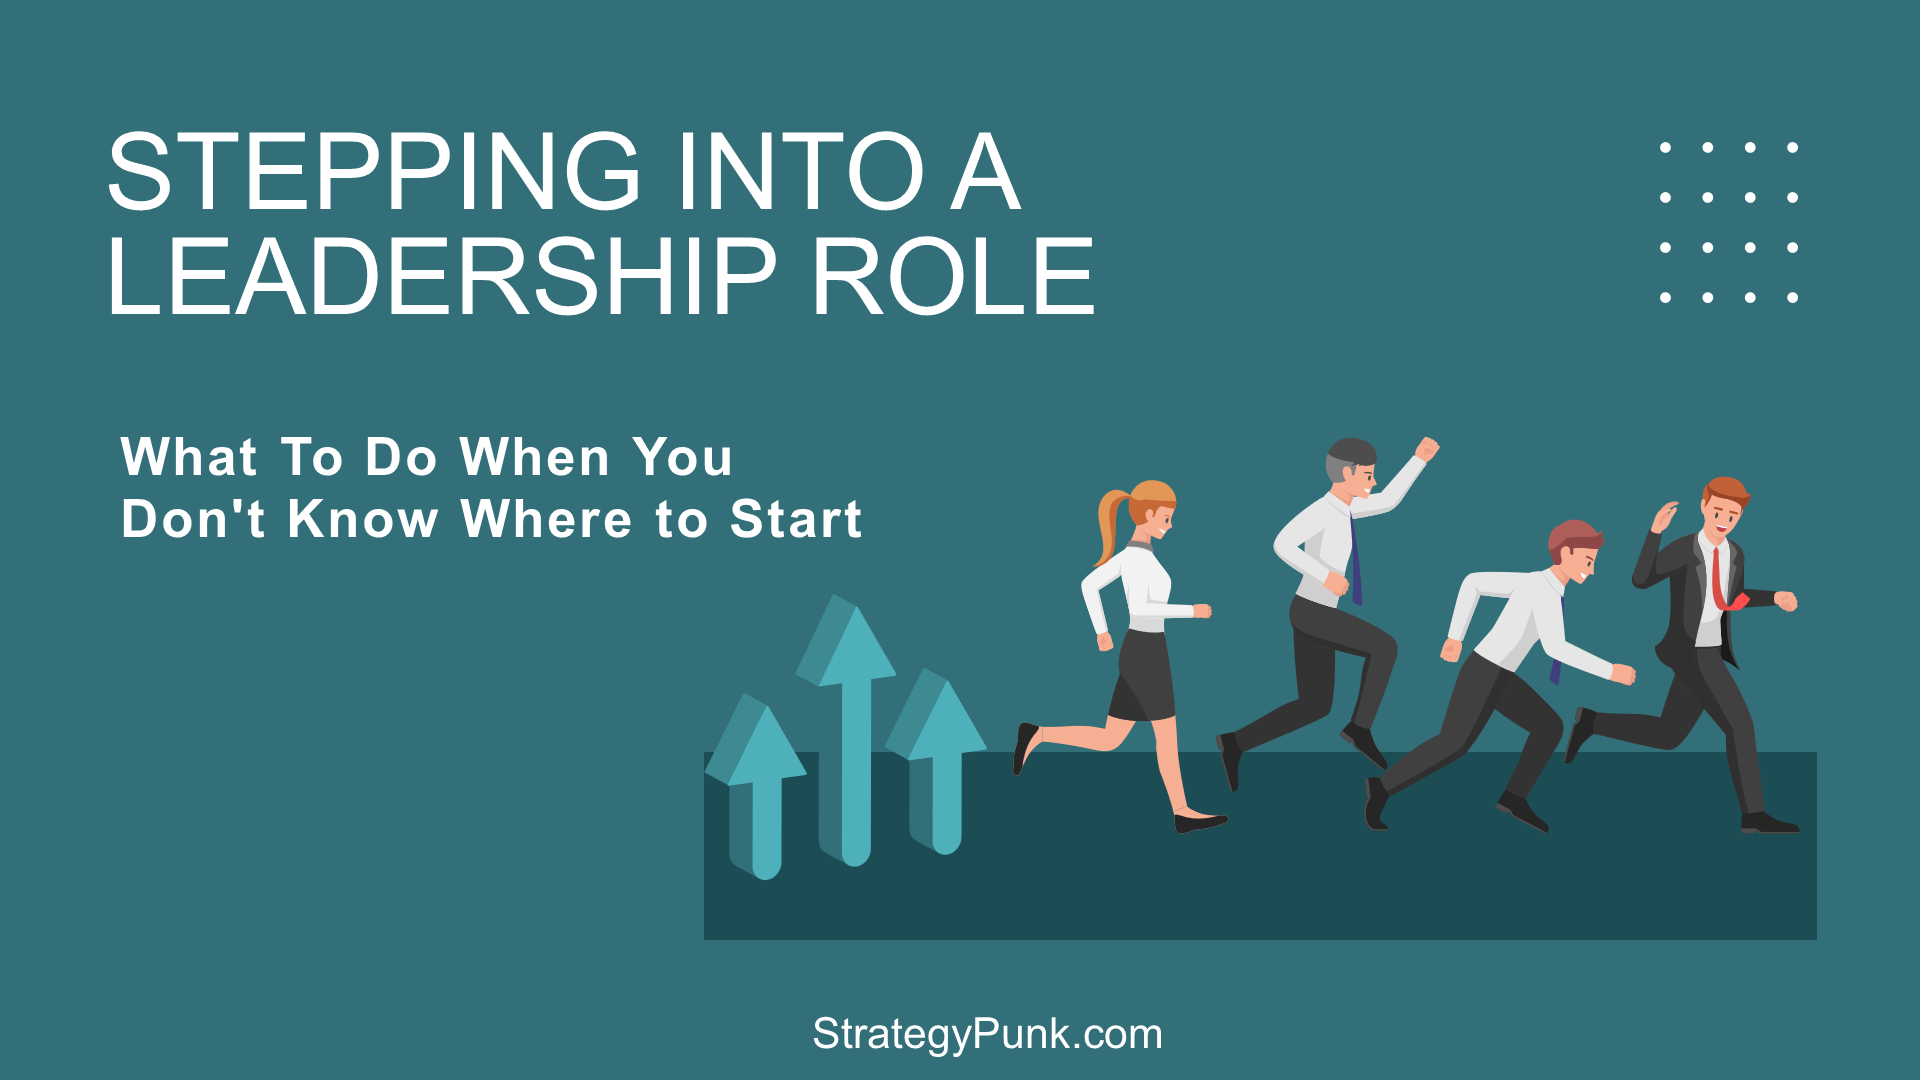 Stepping into a Leadership Role: What To Do When You Don't Know